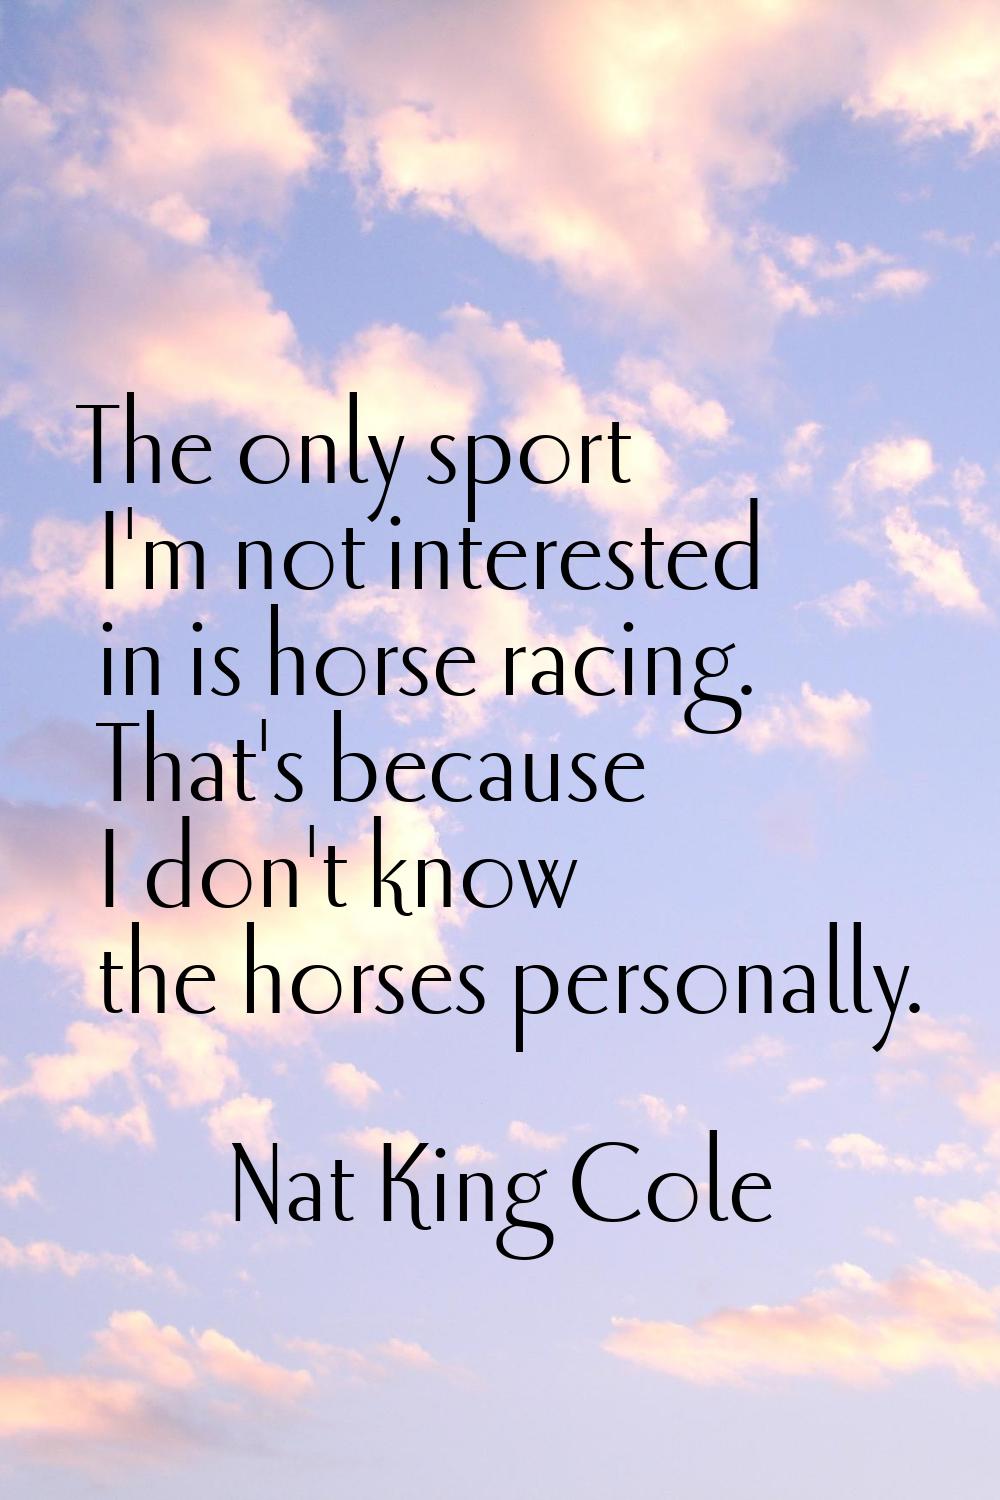 The only sport I'm not interested in is horse racing. That's because I don't know the horses person